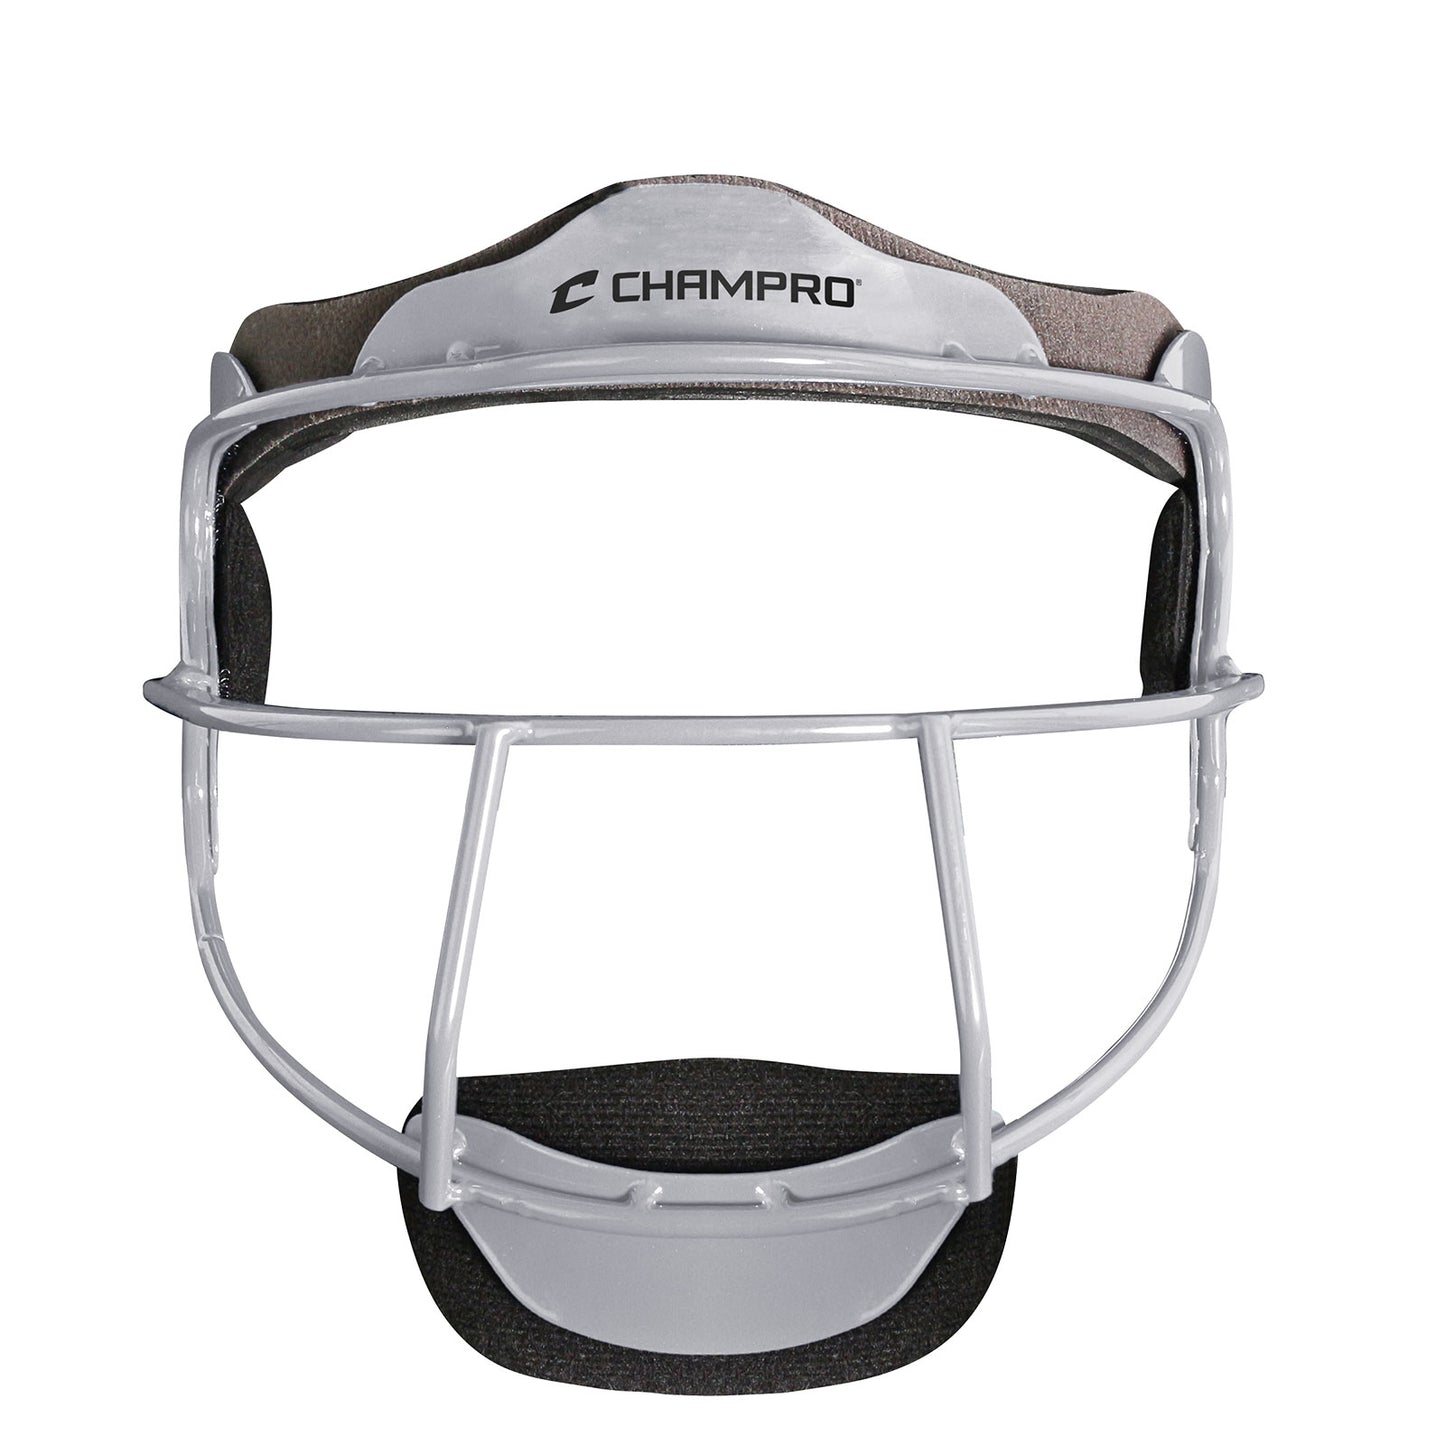 CM01- DGIL CHAMPRO THE GRILL - DEFENSIVE FIELDER'S FACEMASK